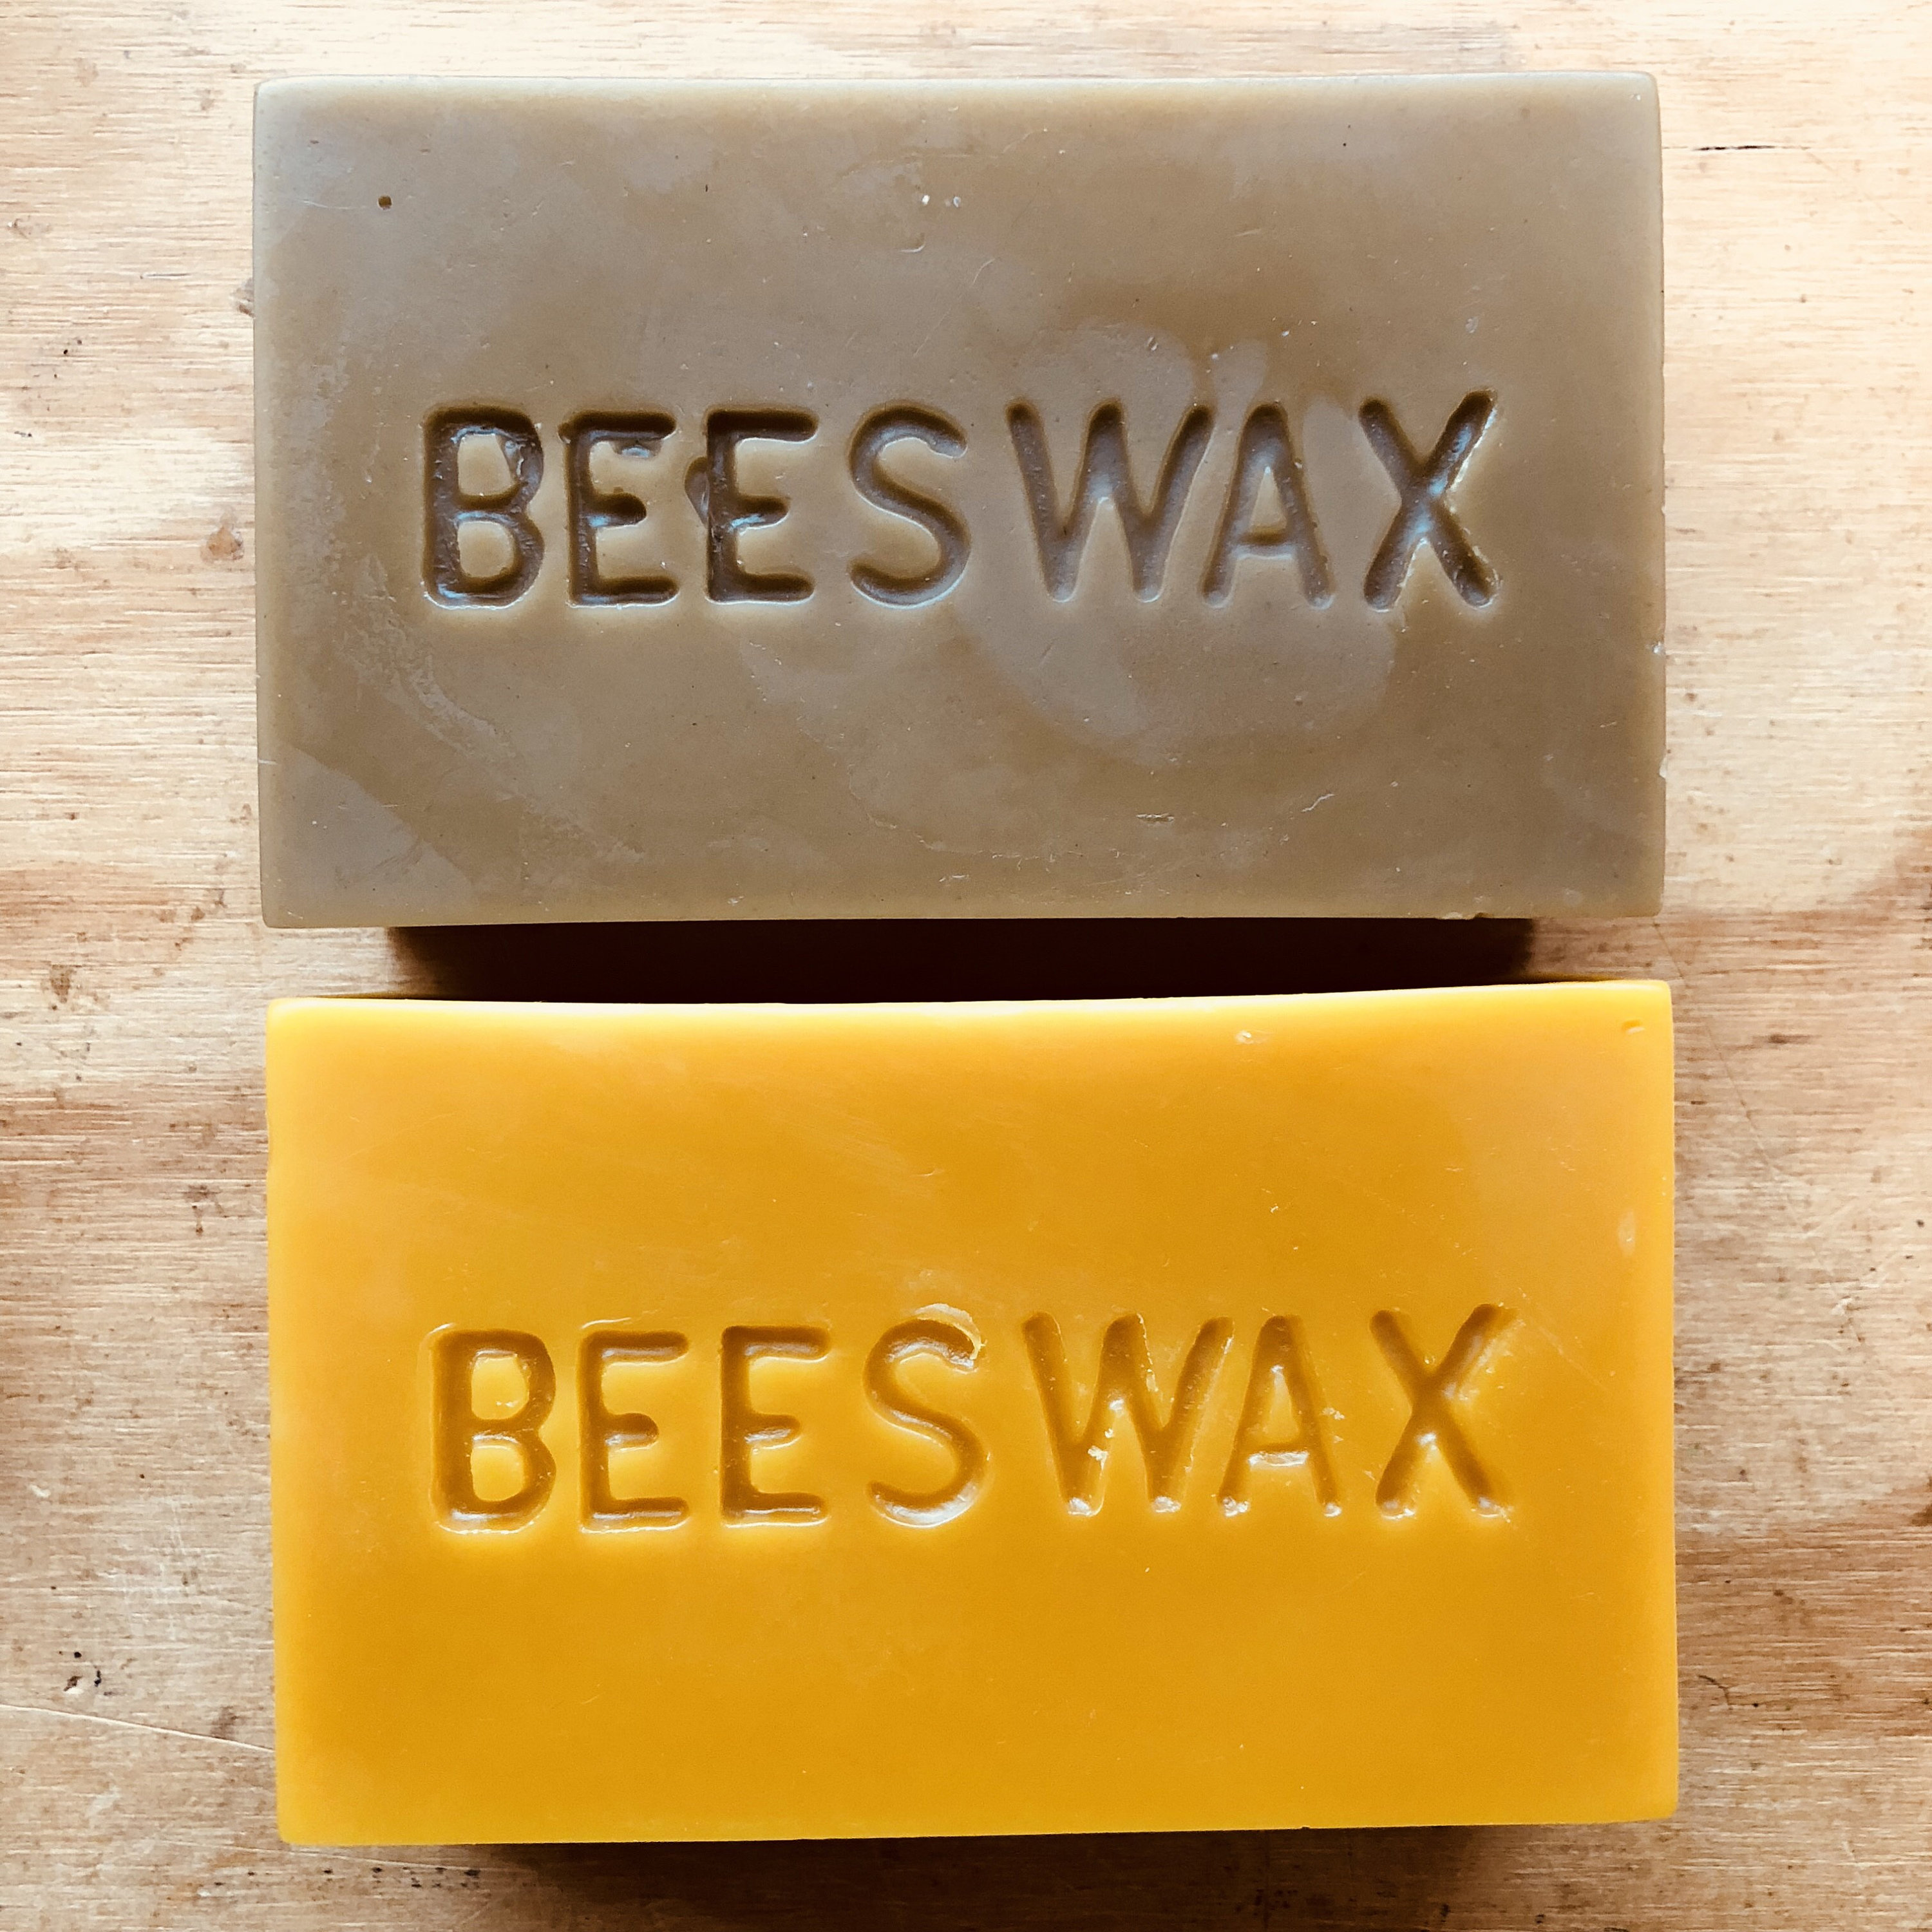 Buy Quality Beeswax in Bulk from Biggs & Featherbelle 2 lb Bulk Bag